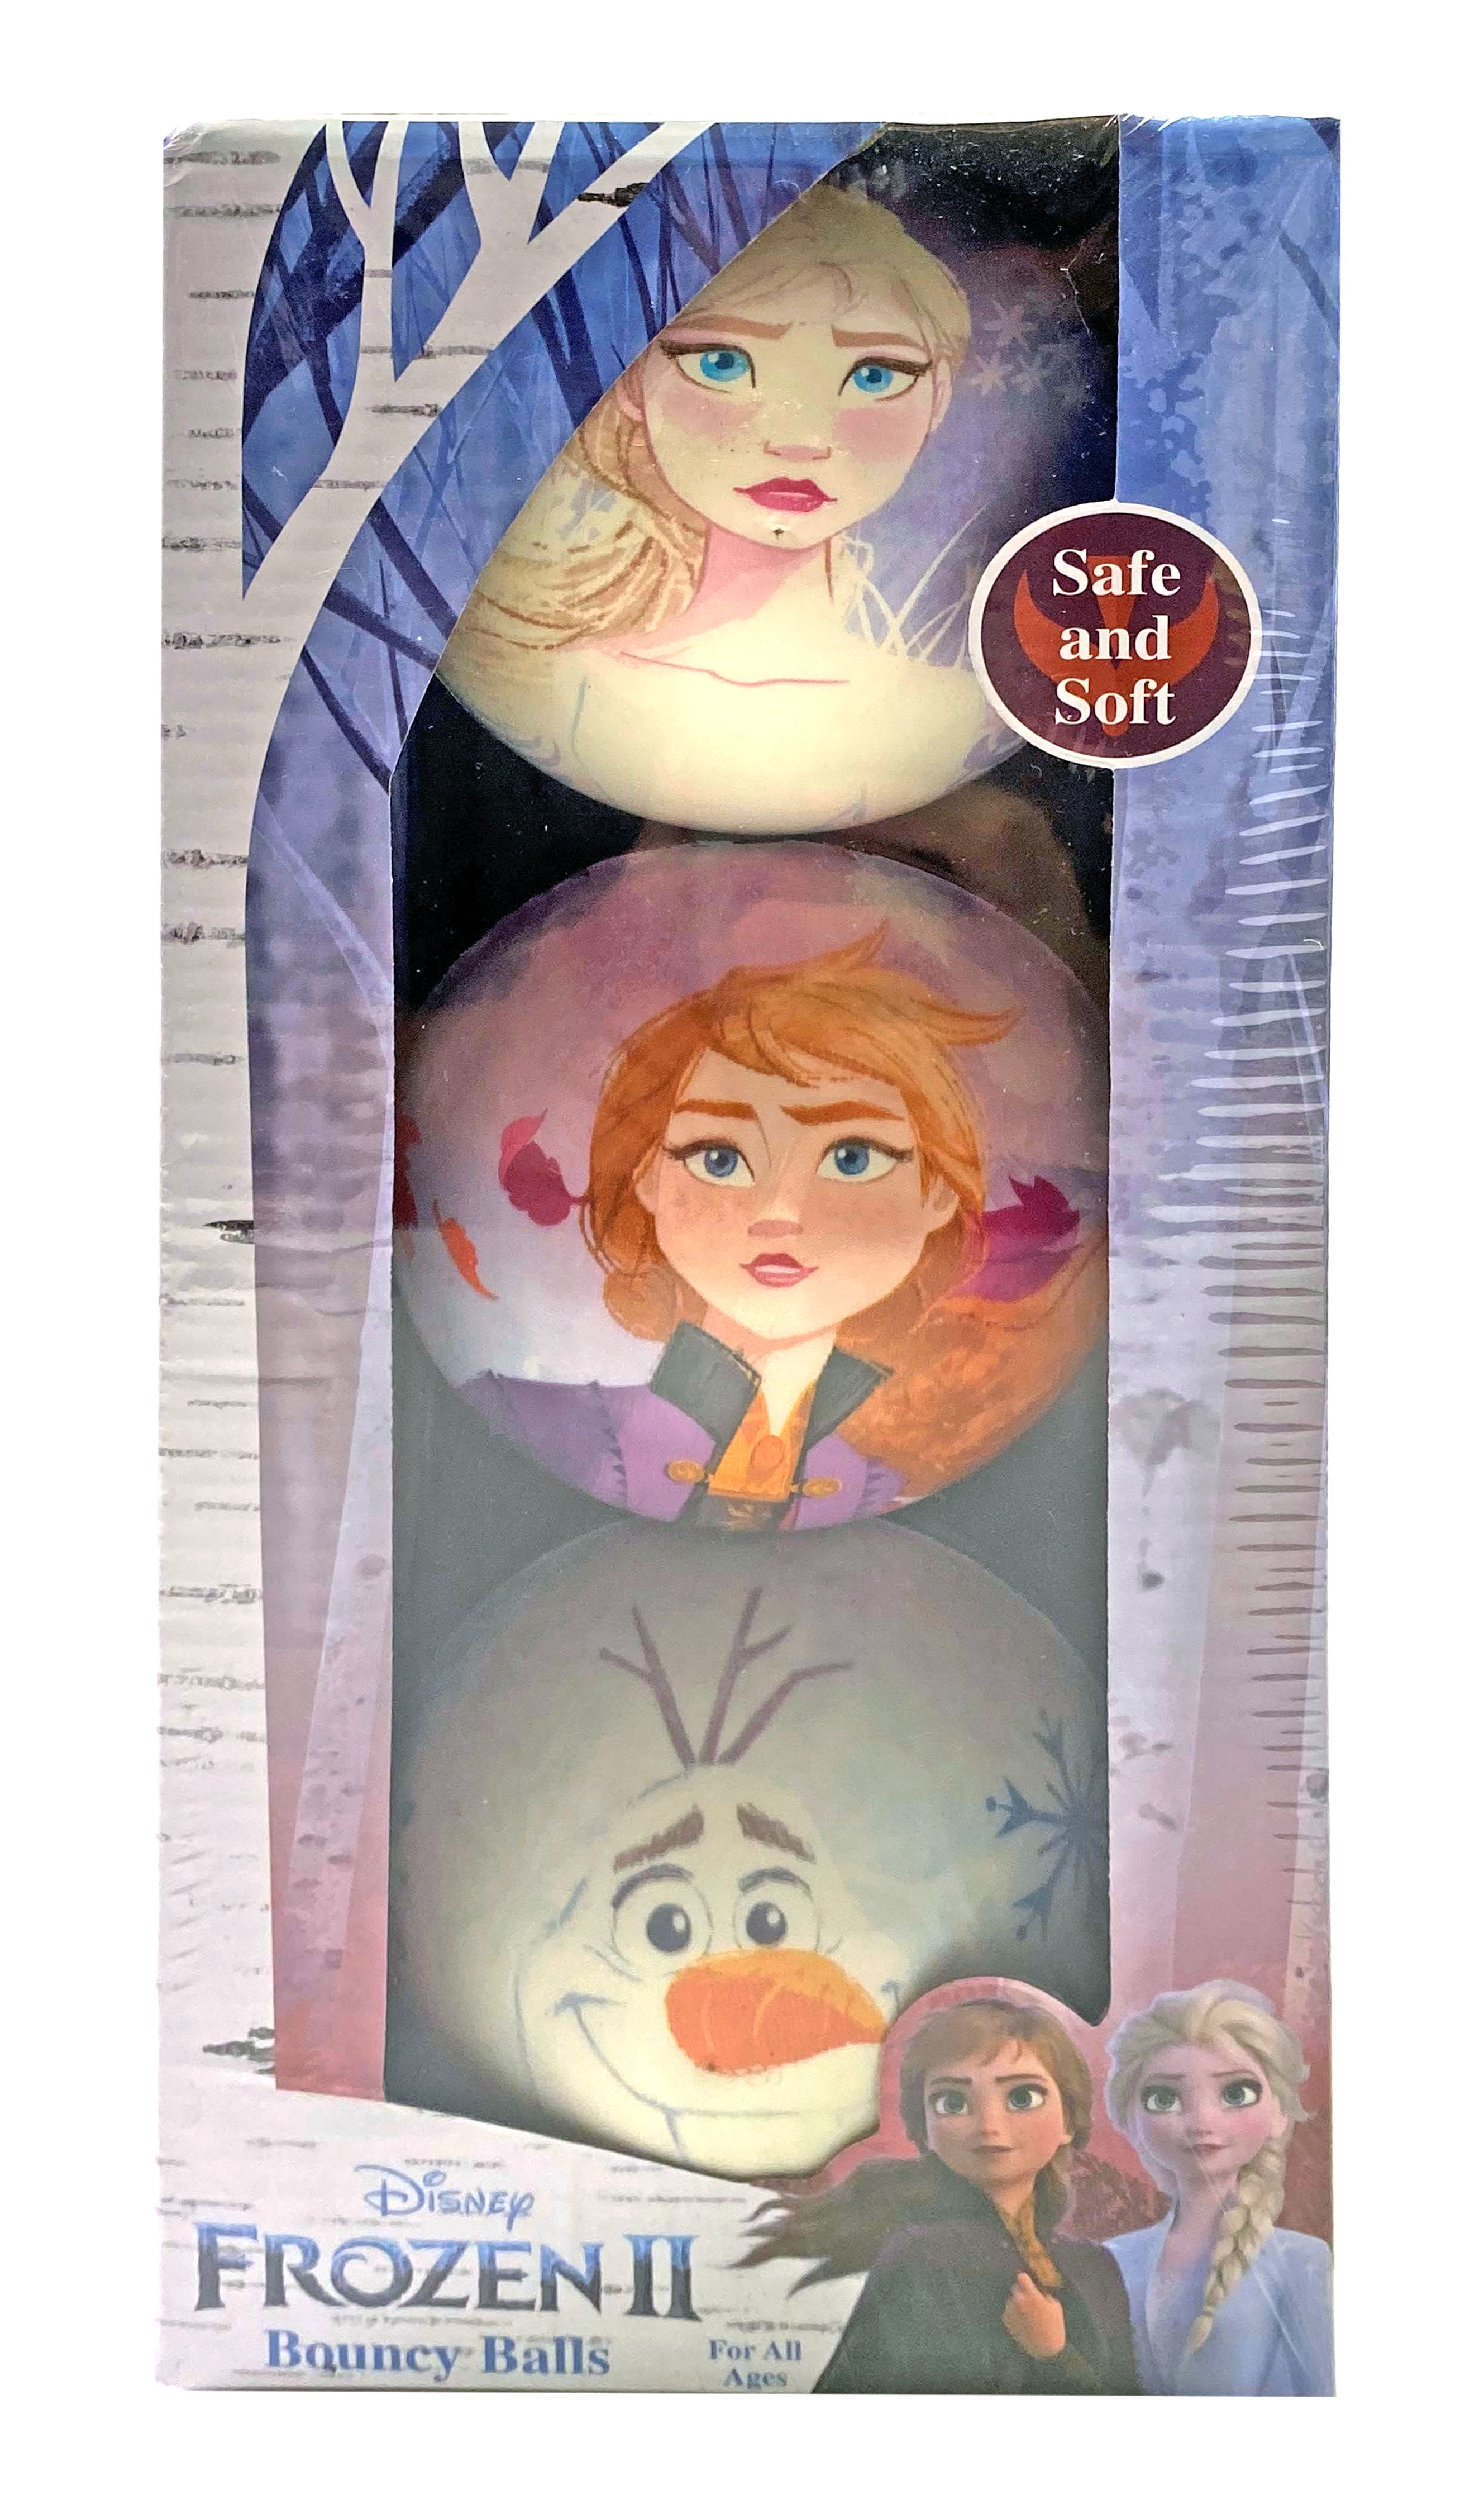 Frozen Outdoor Toys Bundle with 15 Inch Frozen Bouncy Ball Featuring Elsa and Anna with Handle Plus Bonus Stickers and More Disney Frozen Hopper Ball for Kids 